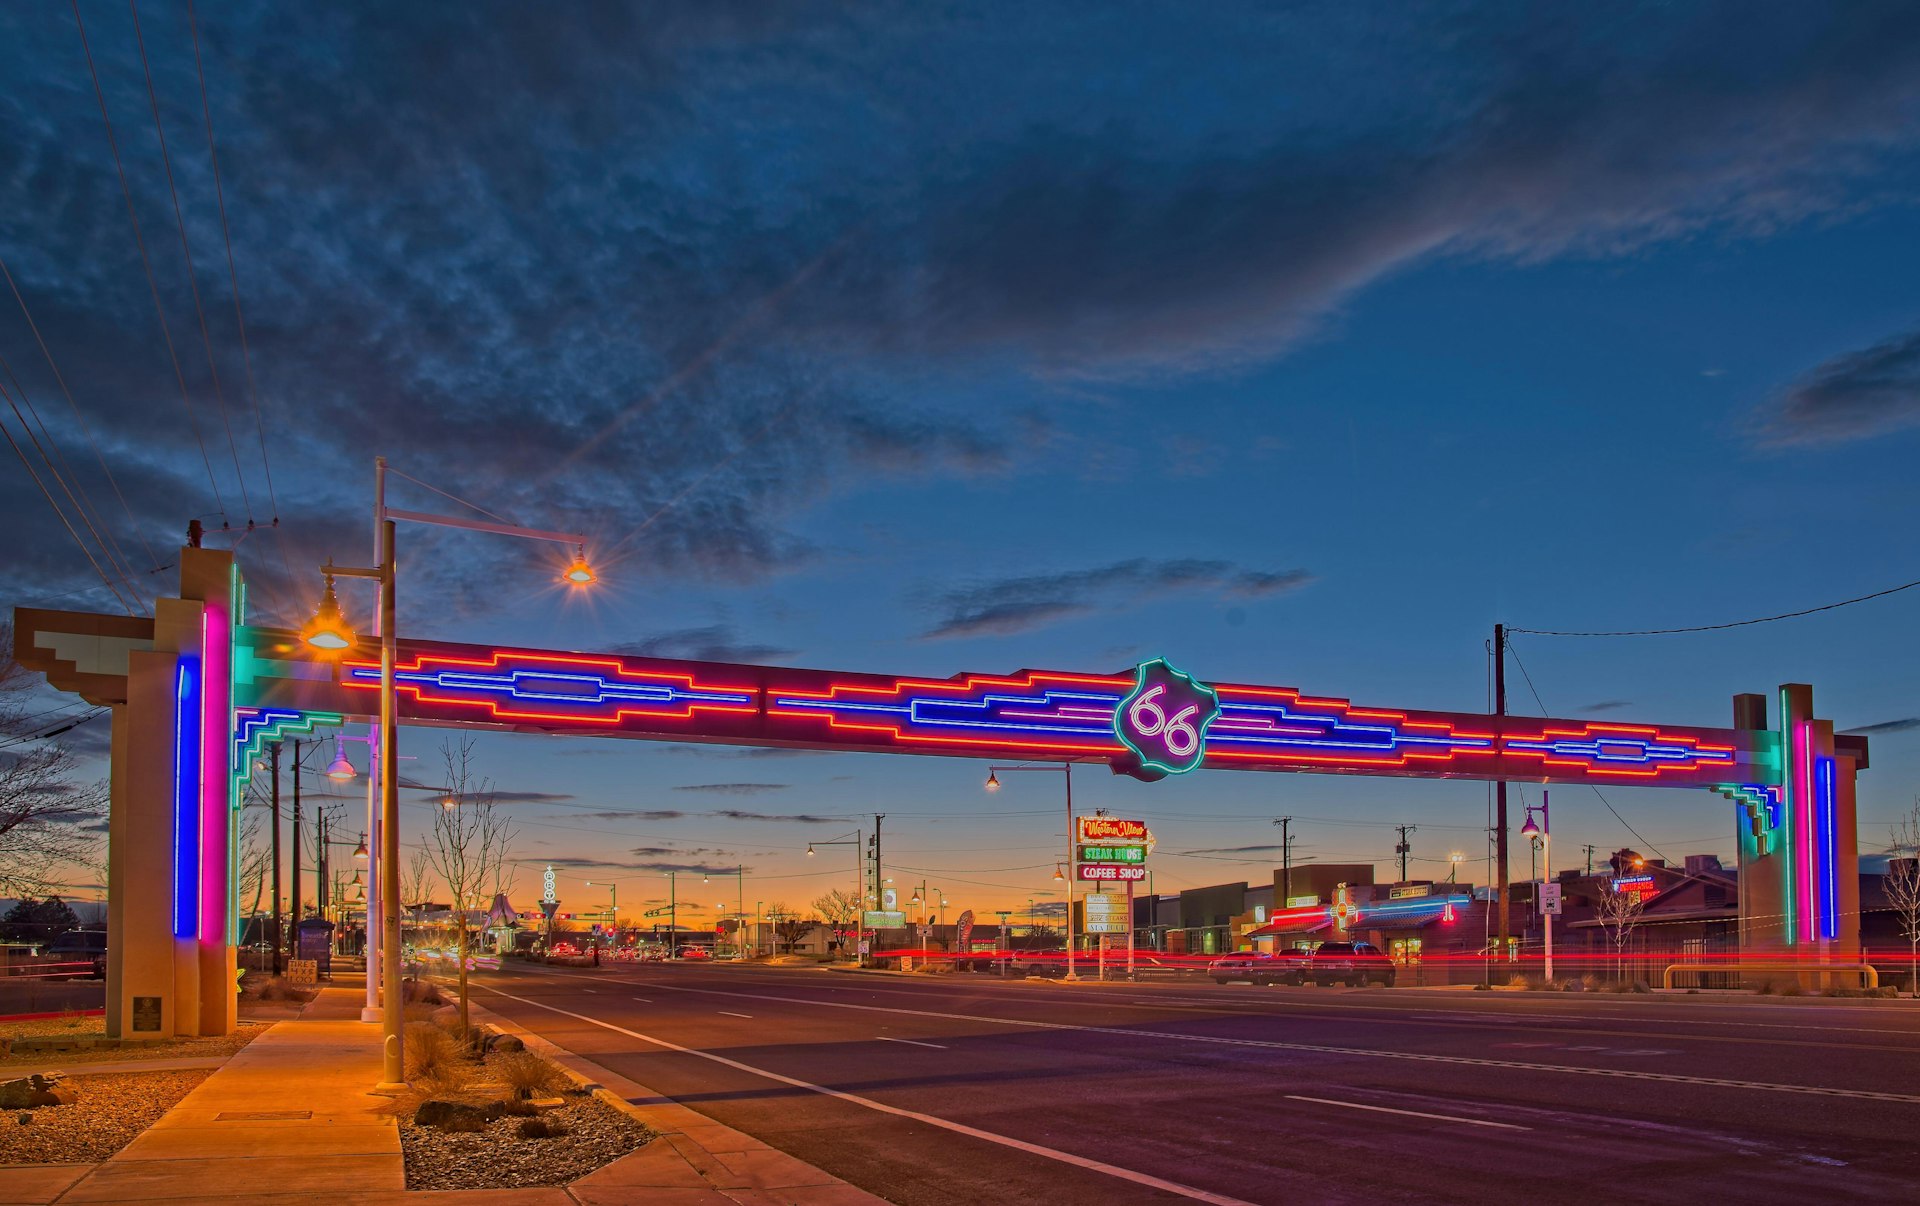 Neon Route 66 sign over Central Ave., (Route 66) Albuquerque, New Mexico, looking West at sunset.  It was also called the Will Rogers Highway.